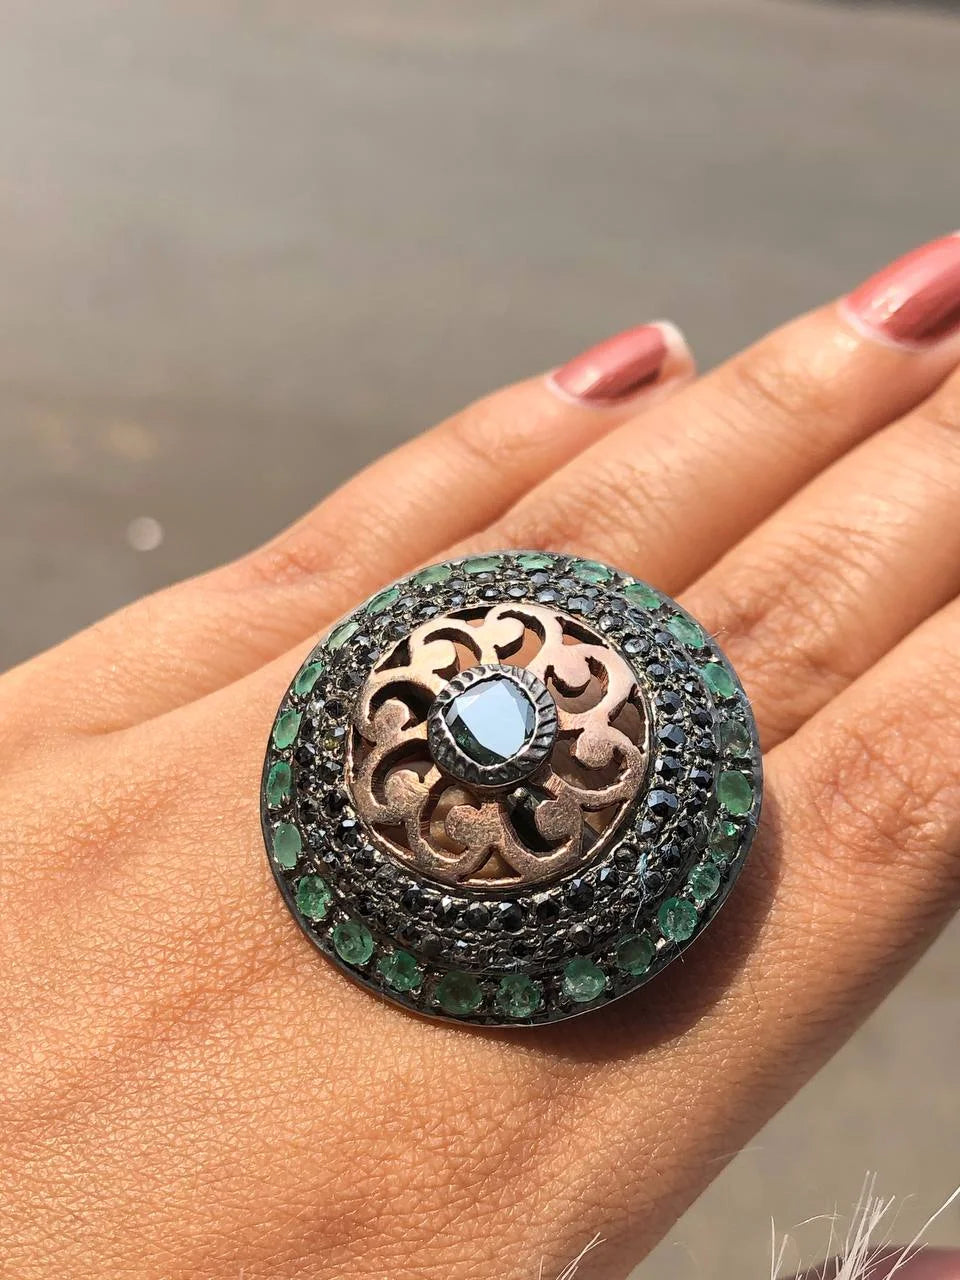 Delicated Vintage Dome Ring